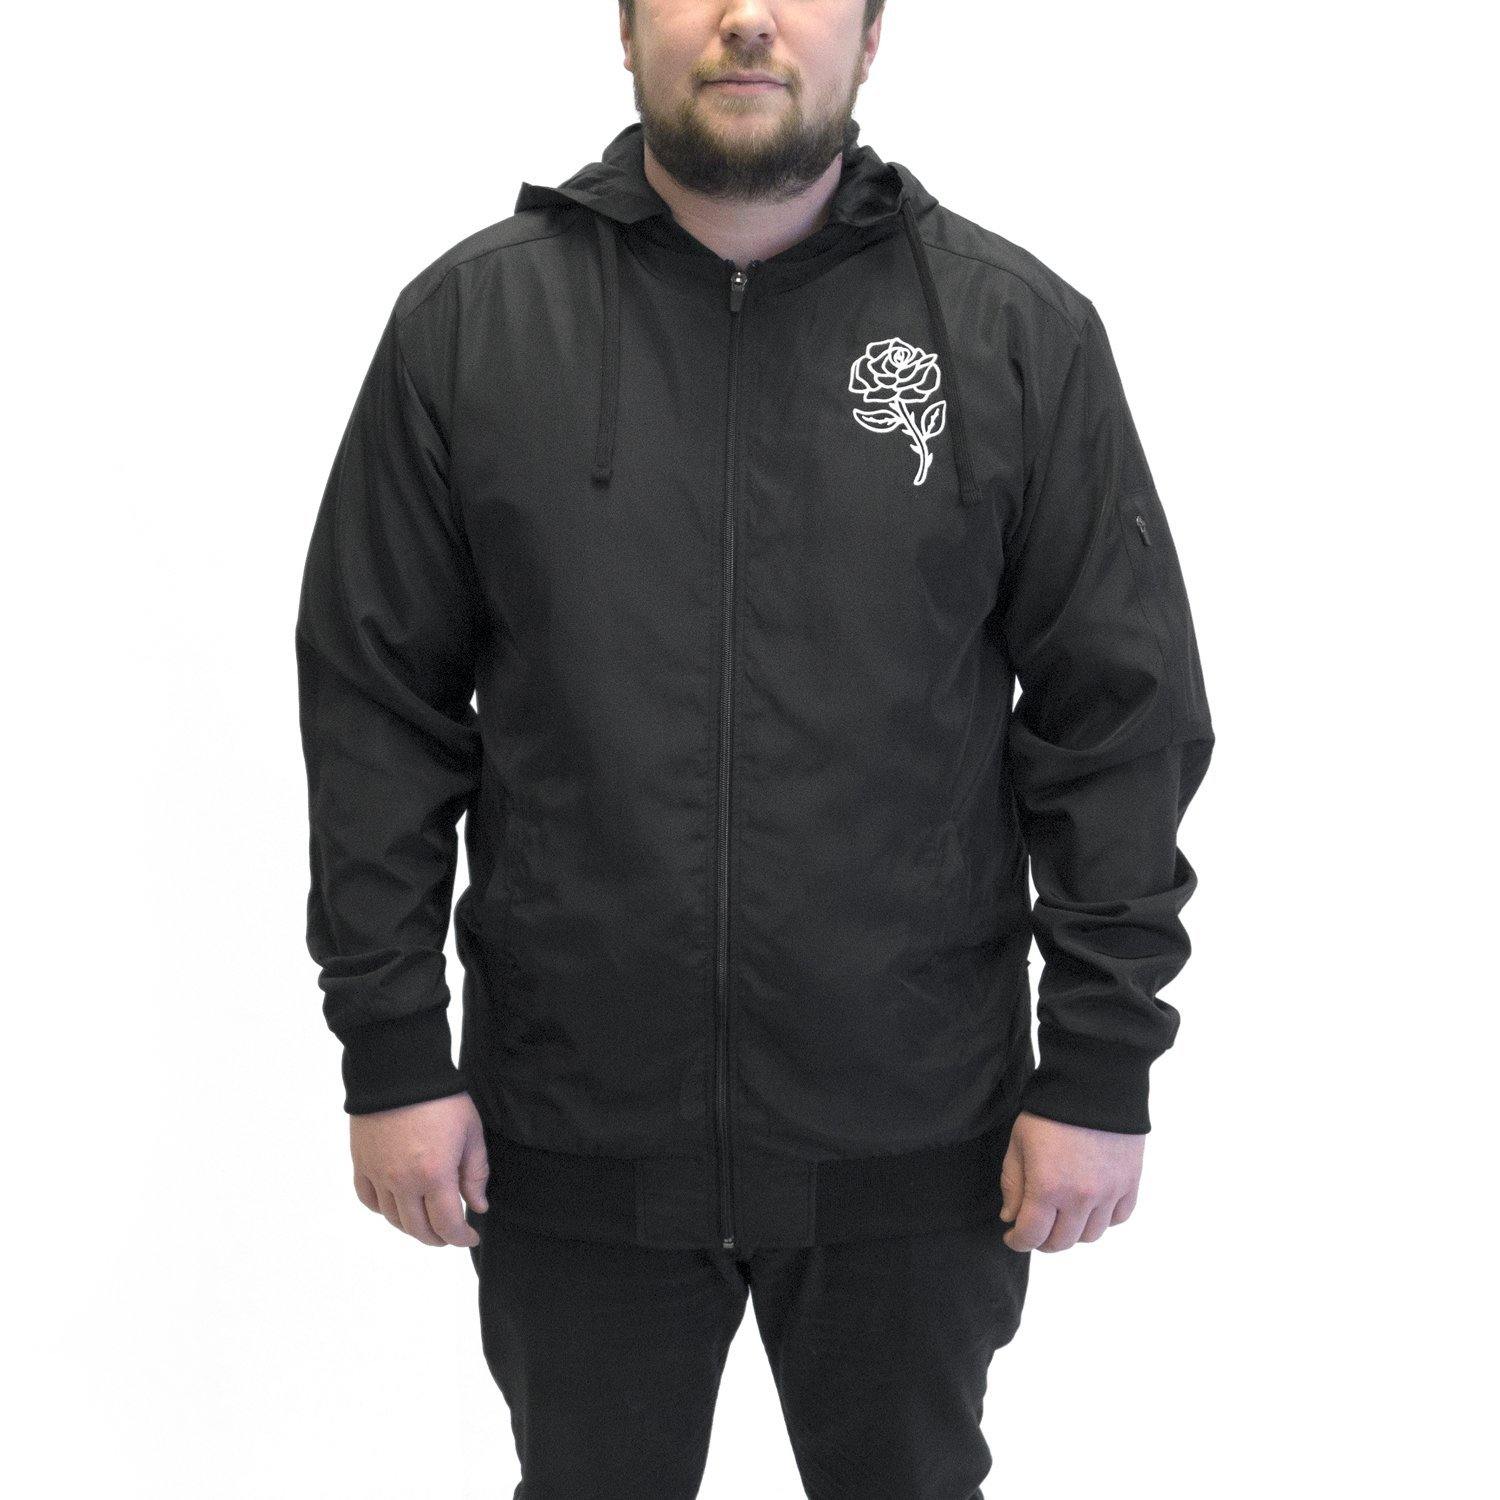 Buy – Balance and Composure "Phases" Jacket – Band & Music Merch – Cold Cuts Merch